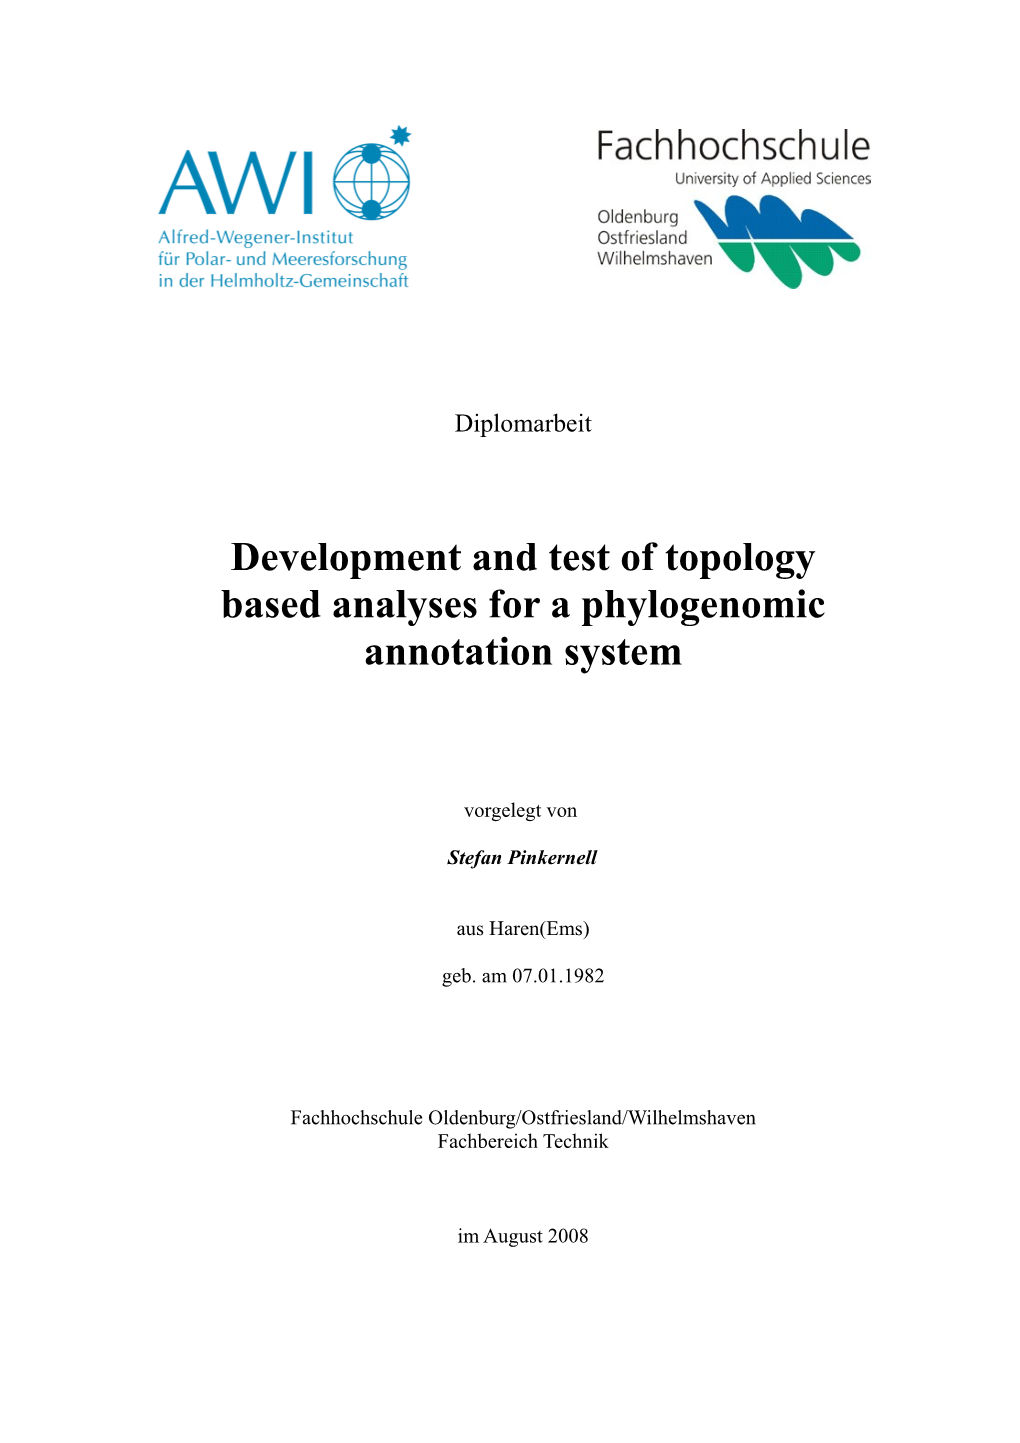 Development and Test of Topology Based Analyses for a Phylogenomic Annotation System